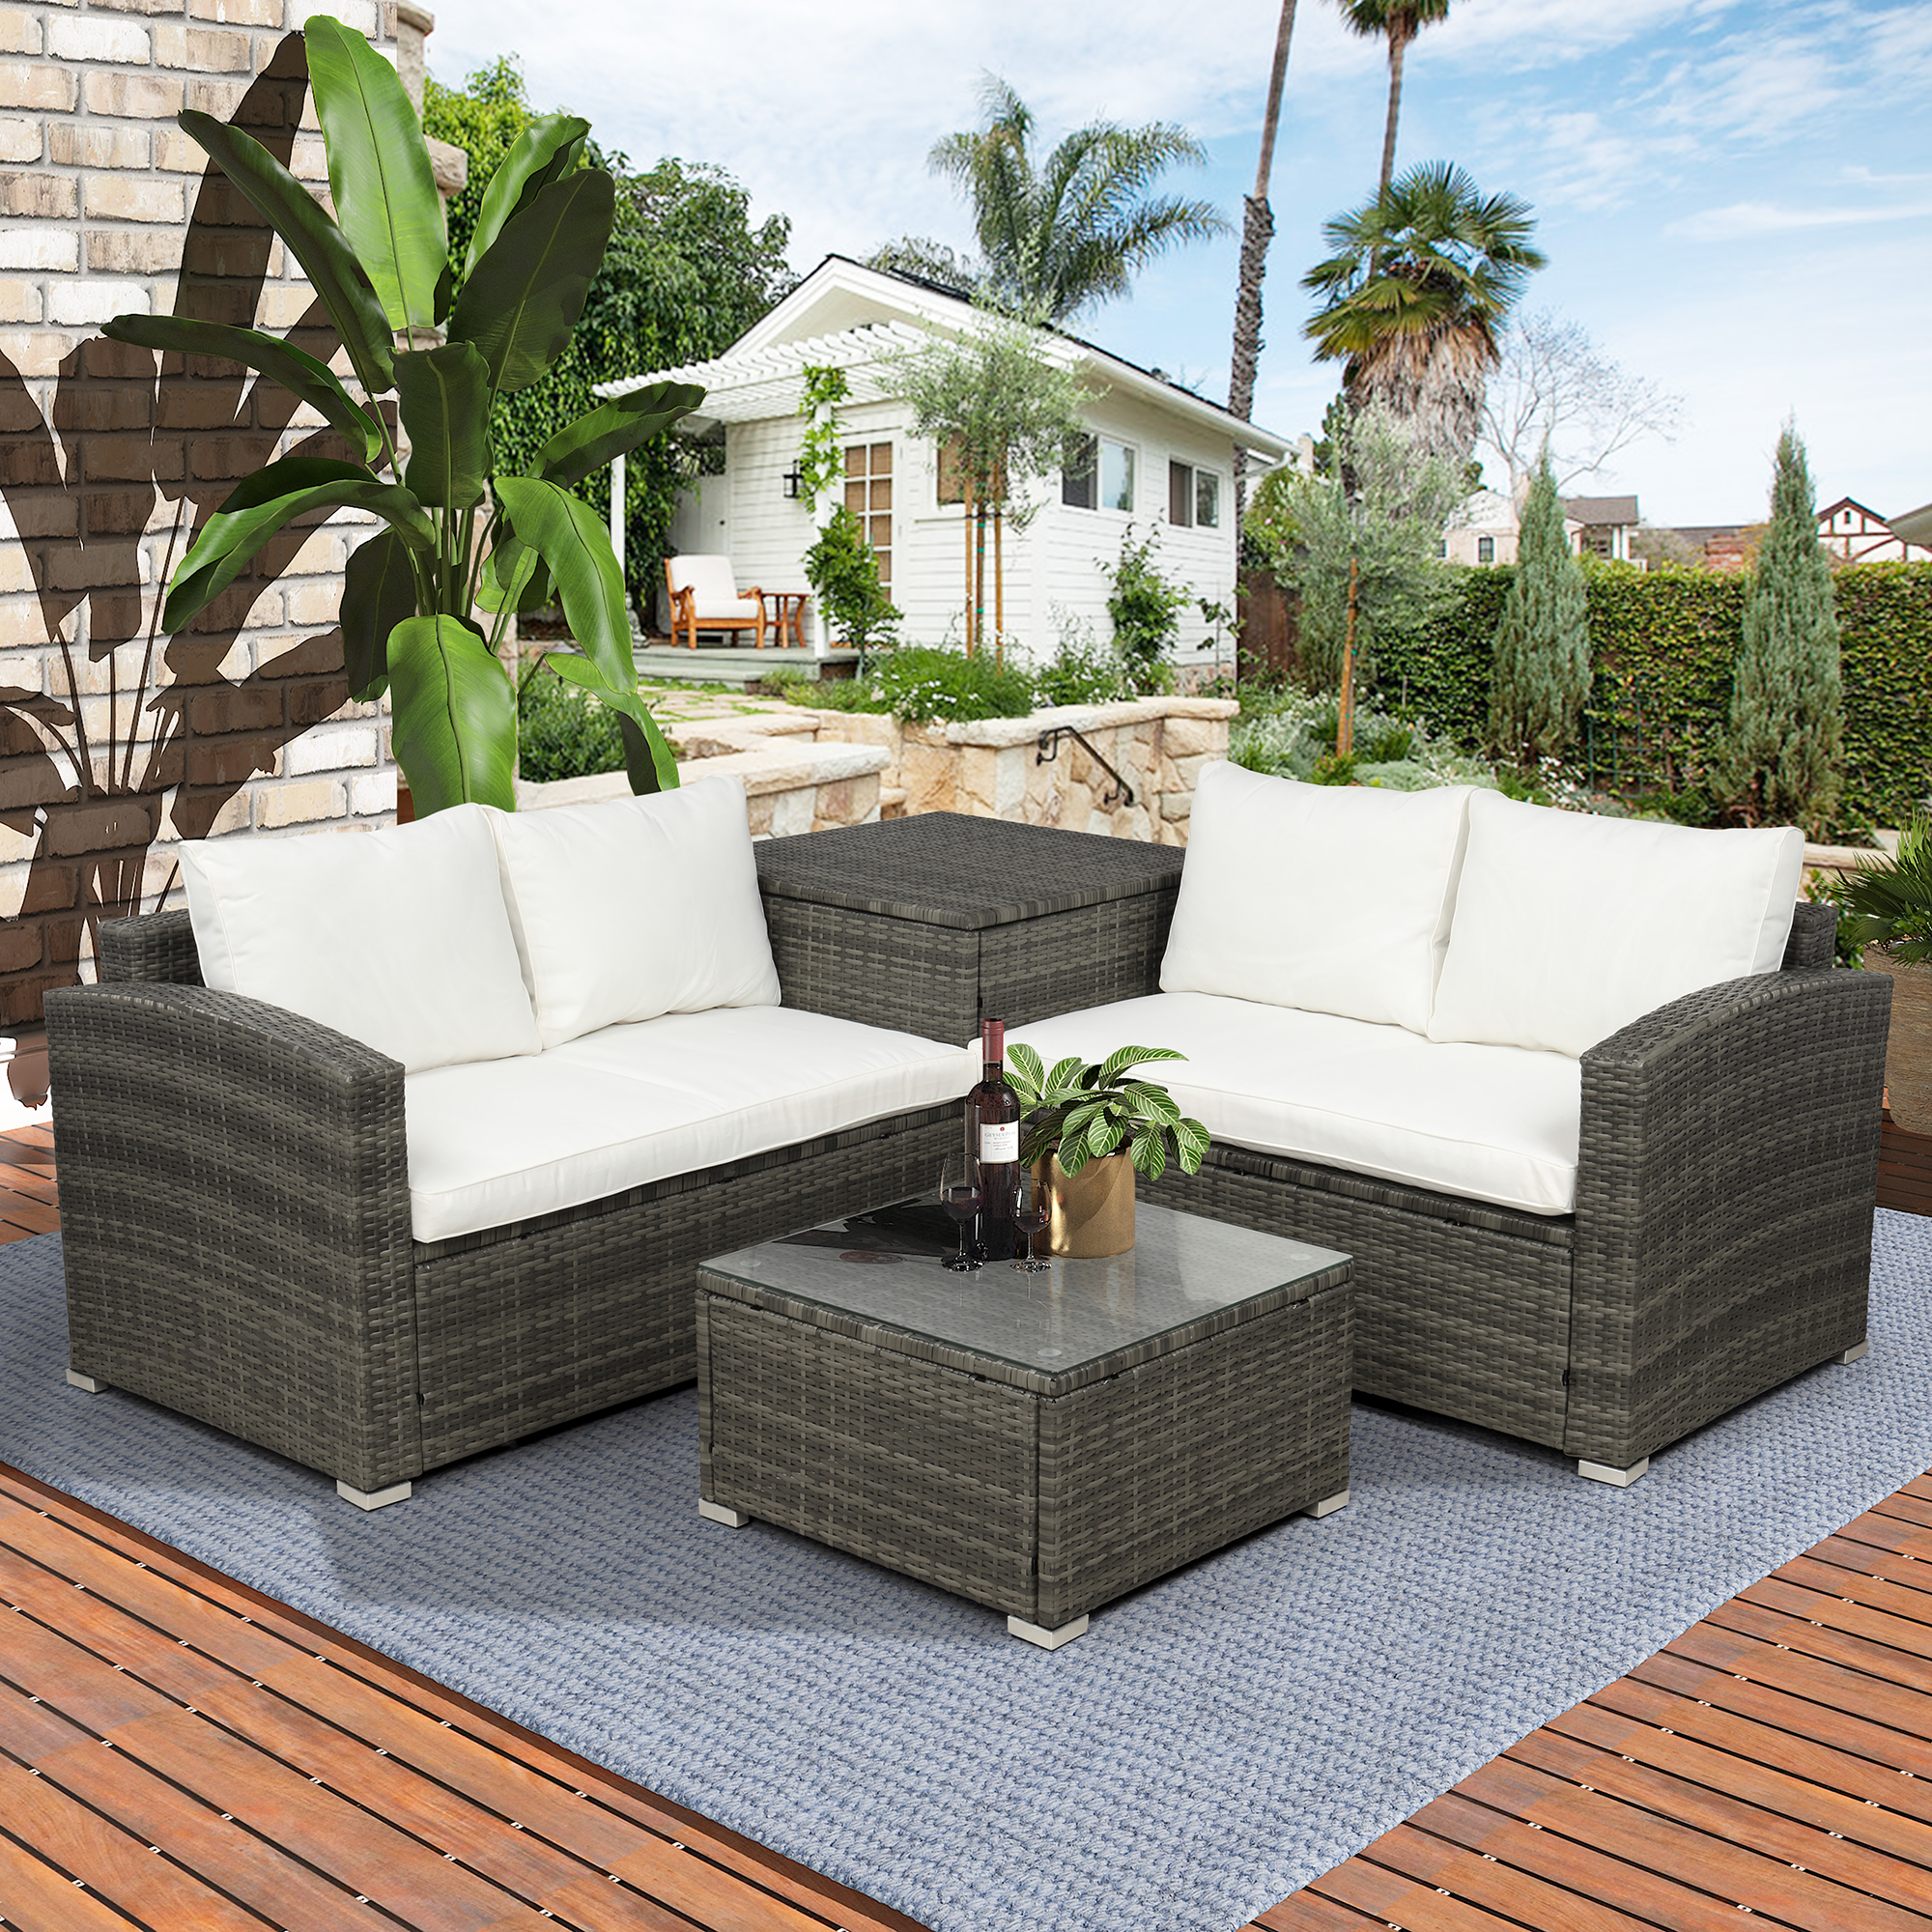 Outdoor Patio Furniture Set, Rattan Chairs & Seating Sets for Backyard, 4-Piece Wicker Conversation Set w/L-Seats Sofa, R-Seats Sofa, Cushion box, Tempered Glass Dining Table, Padded Cushions, S13116 - image 3 of 8